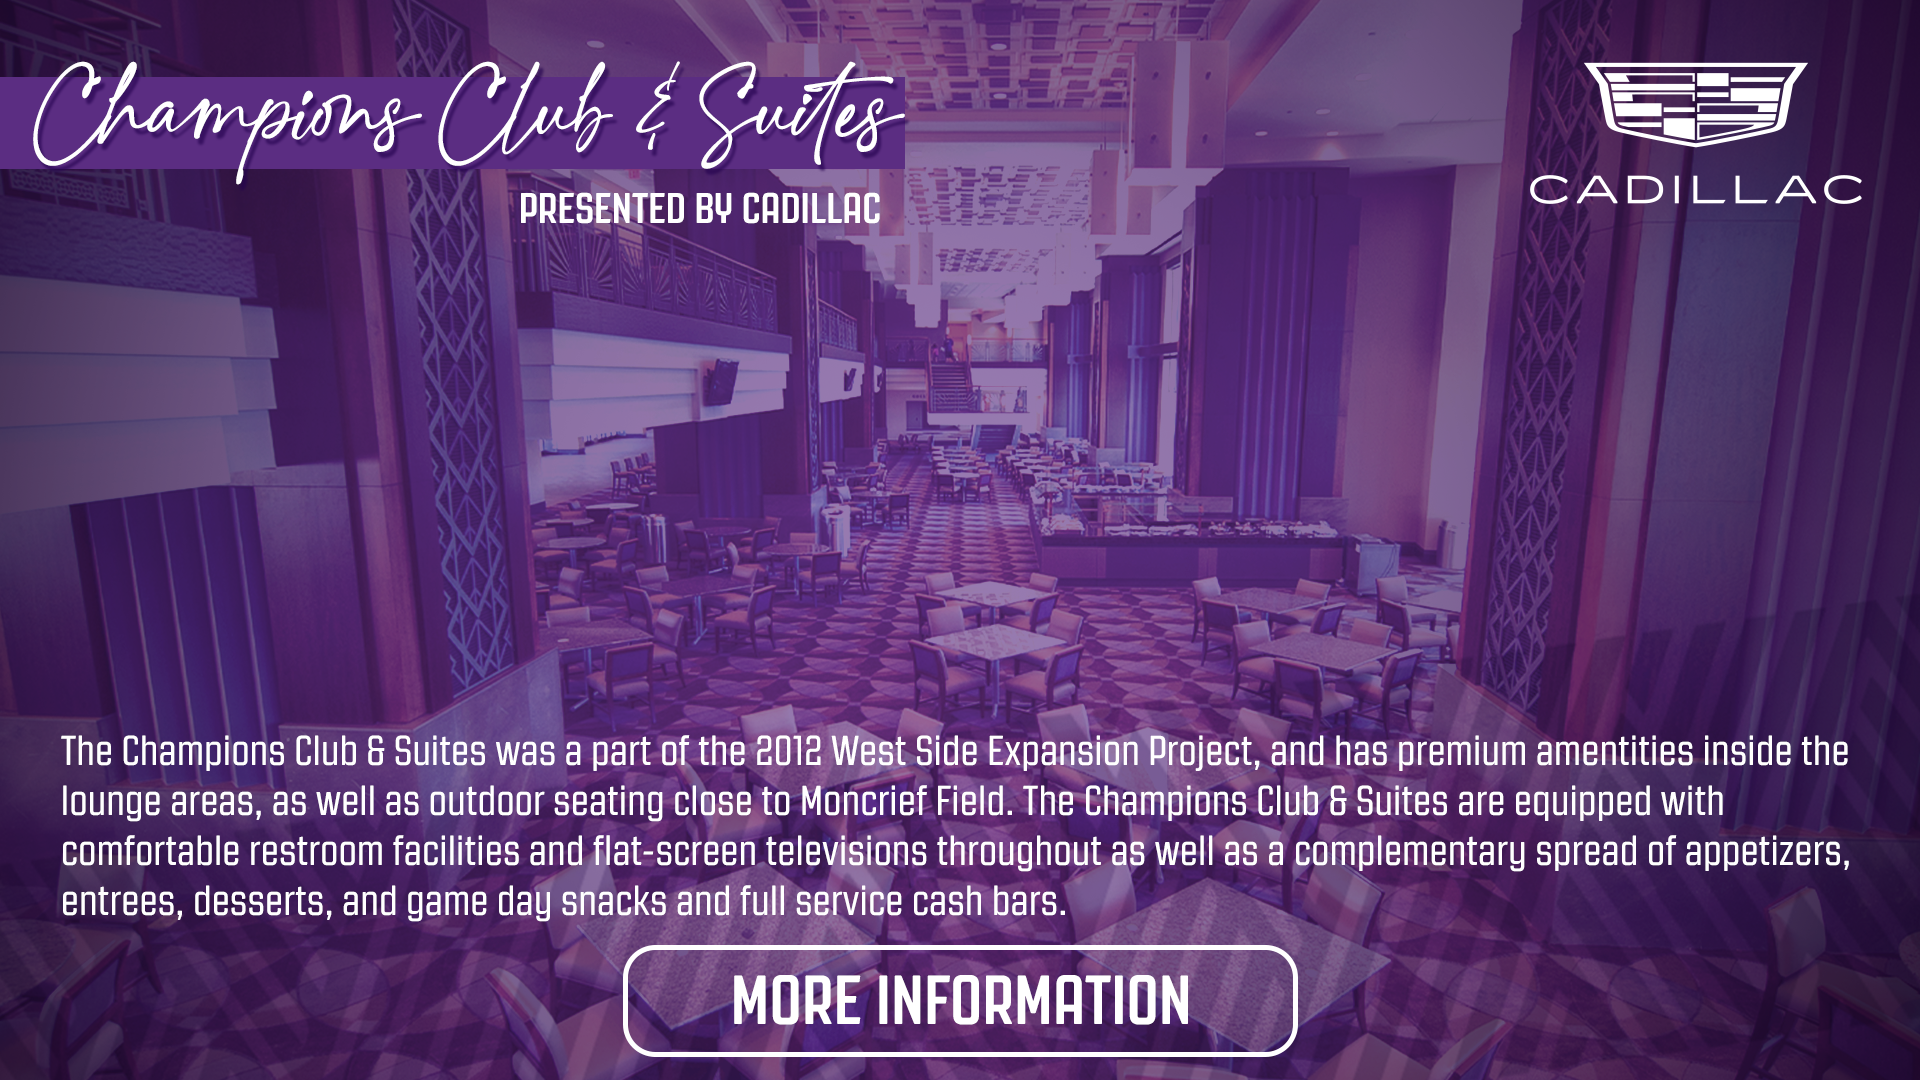 Champions Club & Suites presented by Cadillac MORE INFORMATION